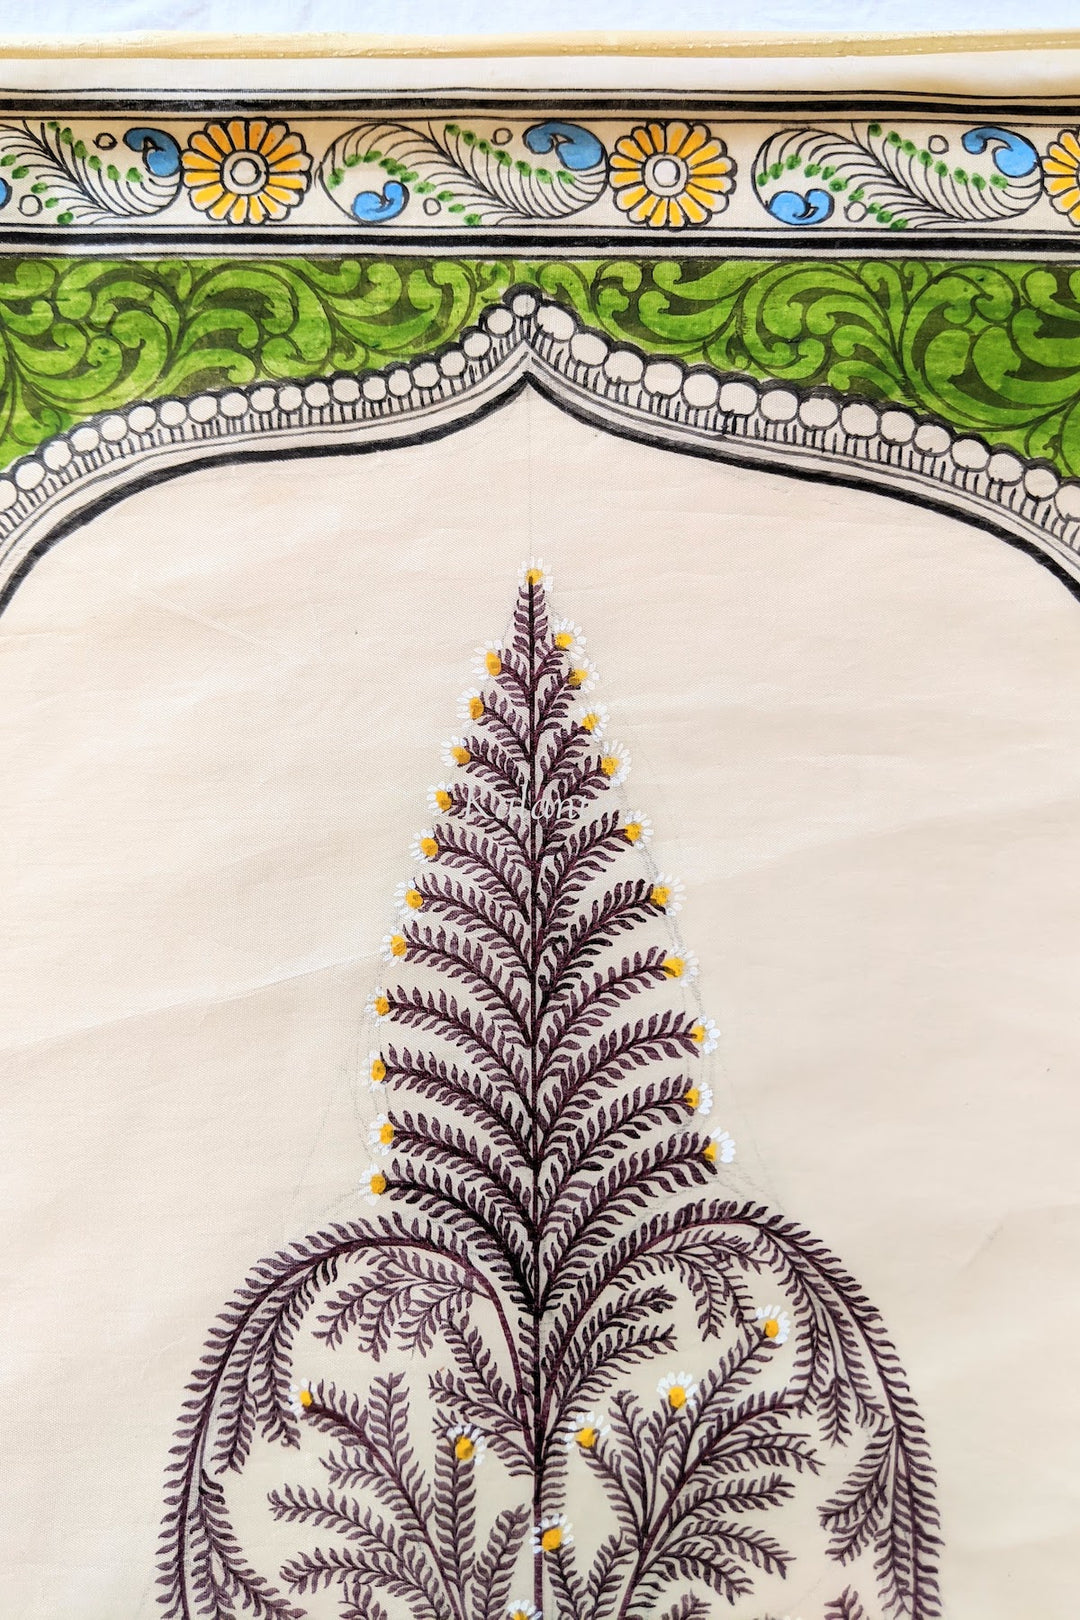 Detailed view of the tree top and border of the Saura painting